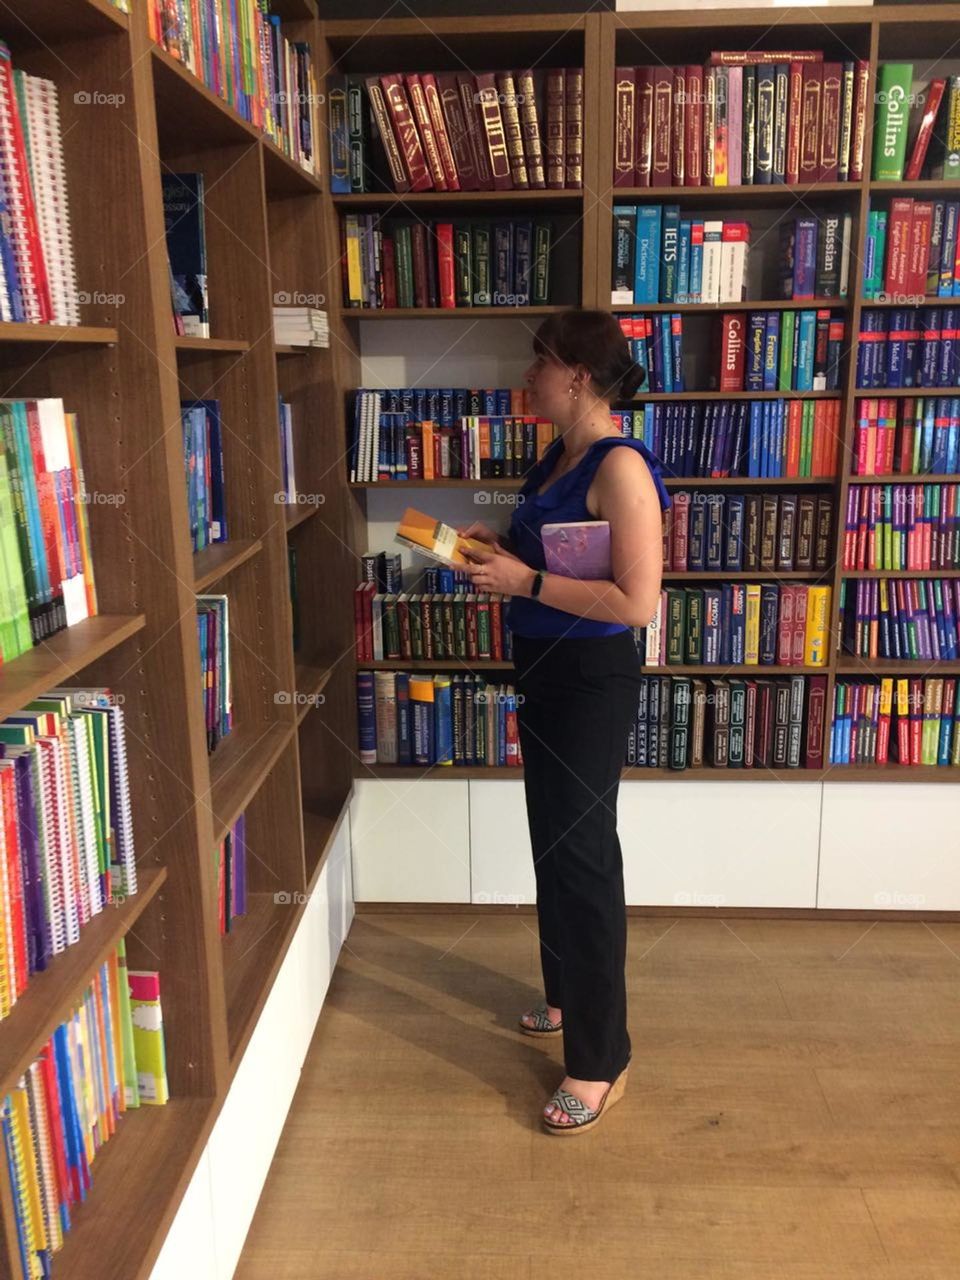 A girl chooses books in a bookstore